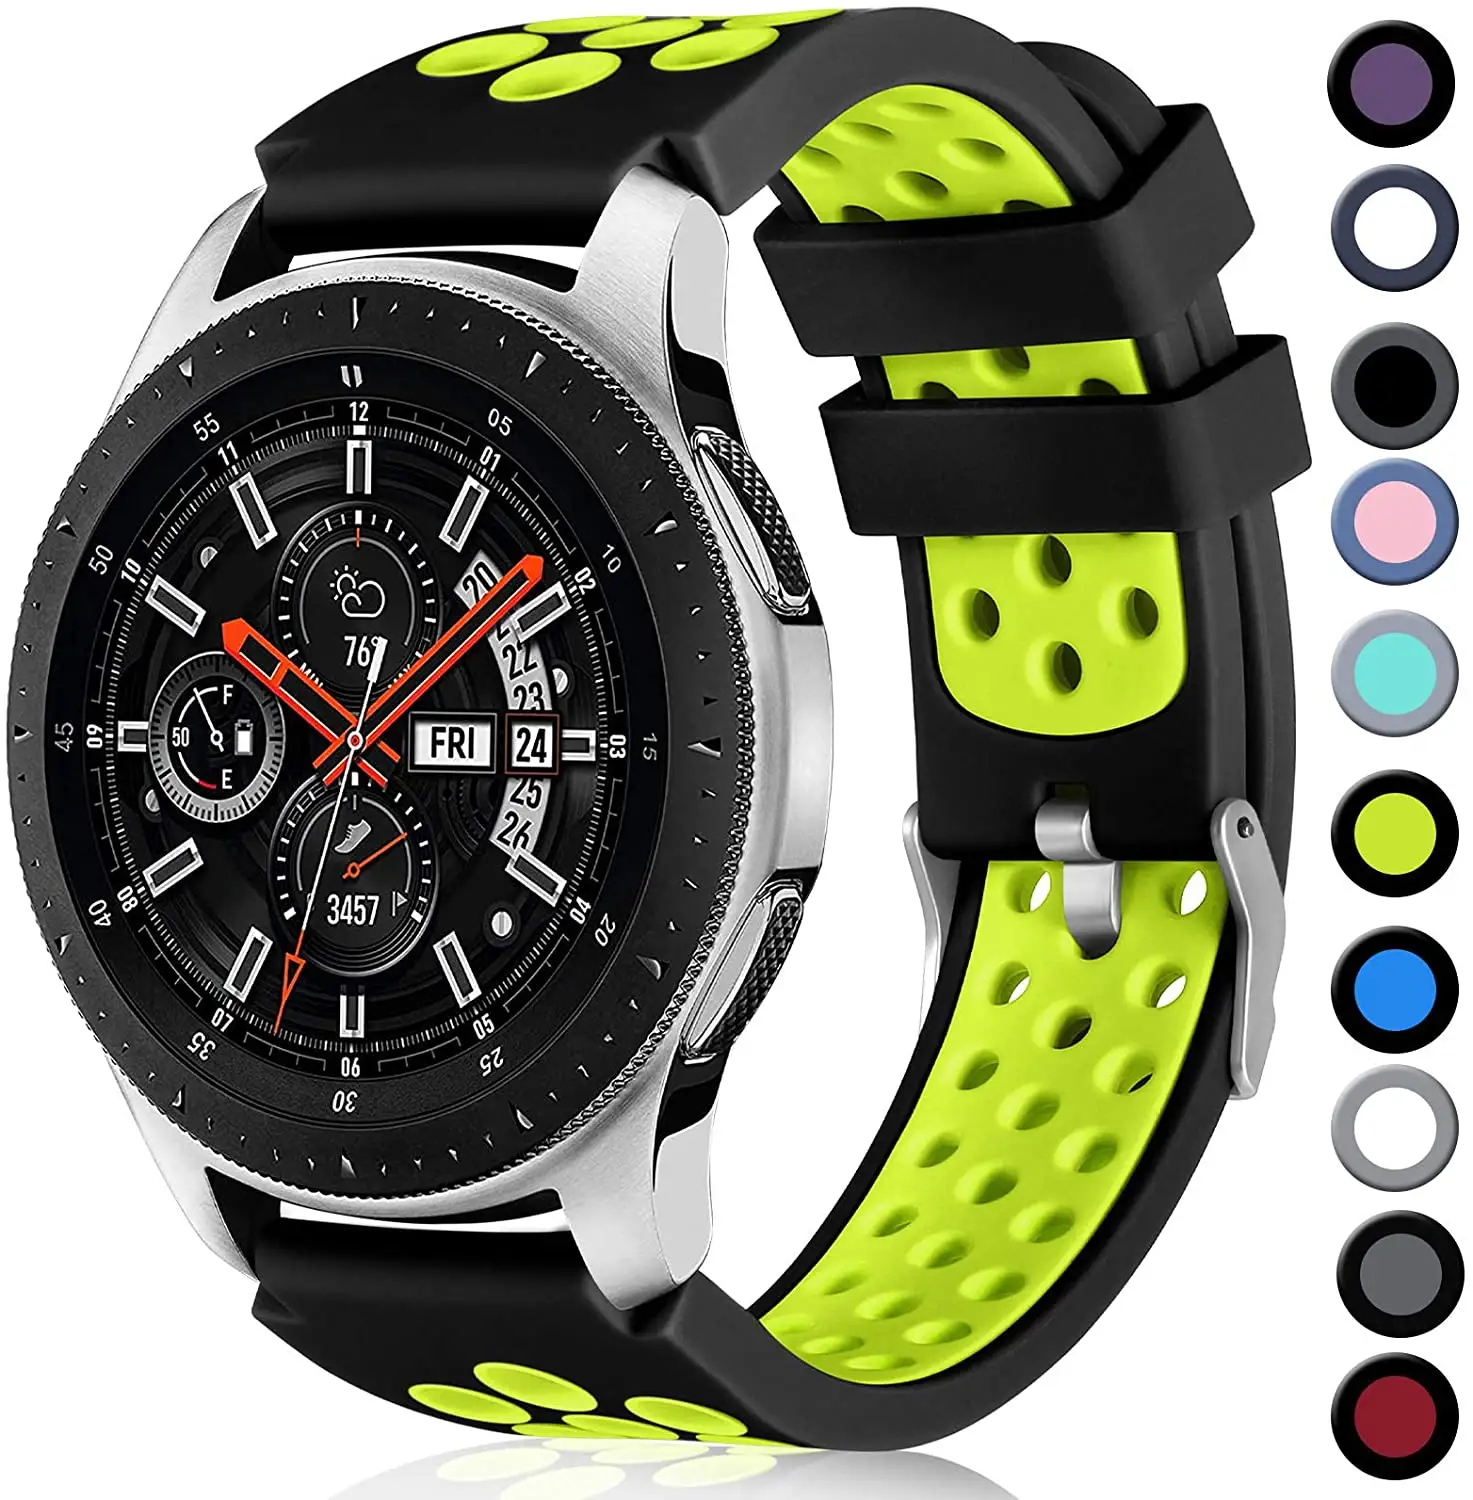 Adepoy S-S001 Custom For Samsung Gear S3 Frontier Reloj Sport Silicone 22mm Smart Watch band For 45mm galaxy watch 3 strap